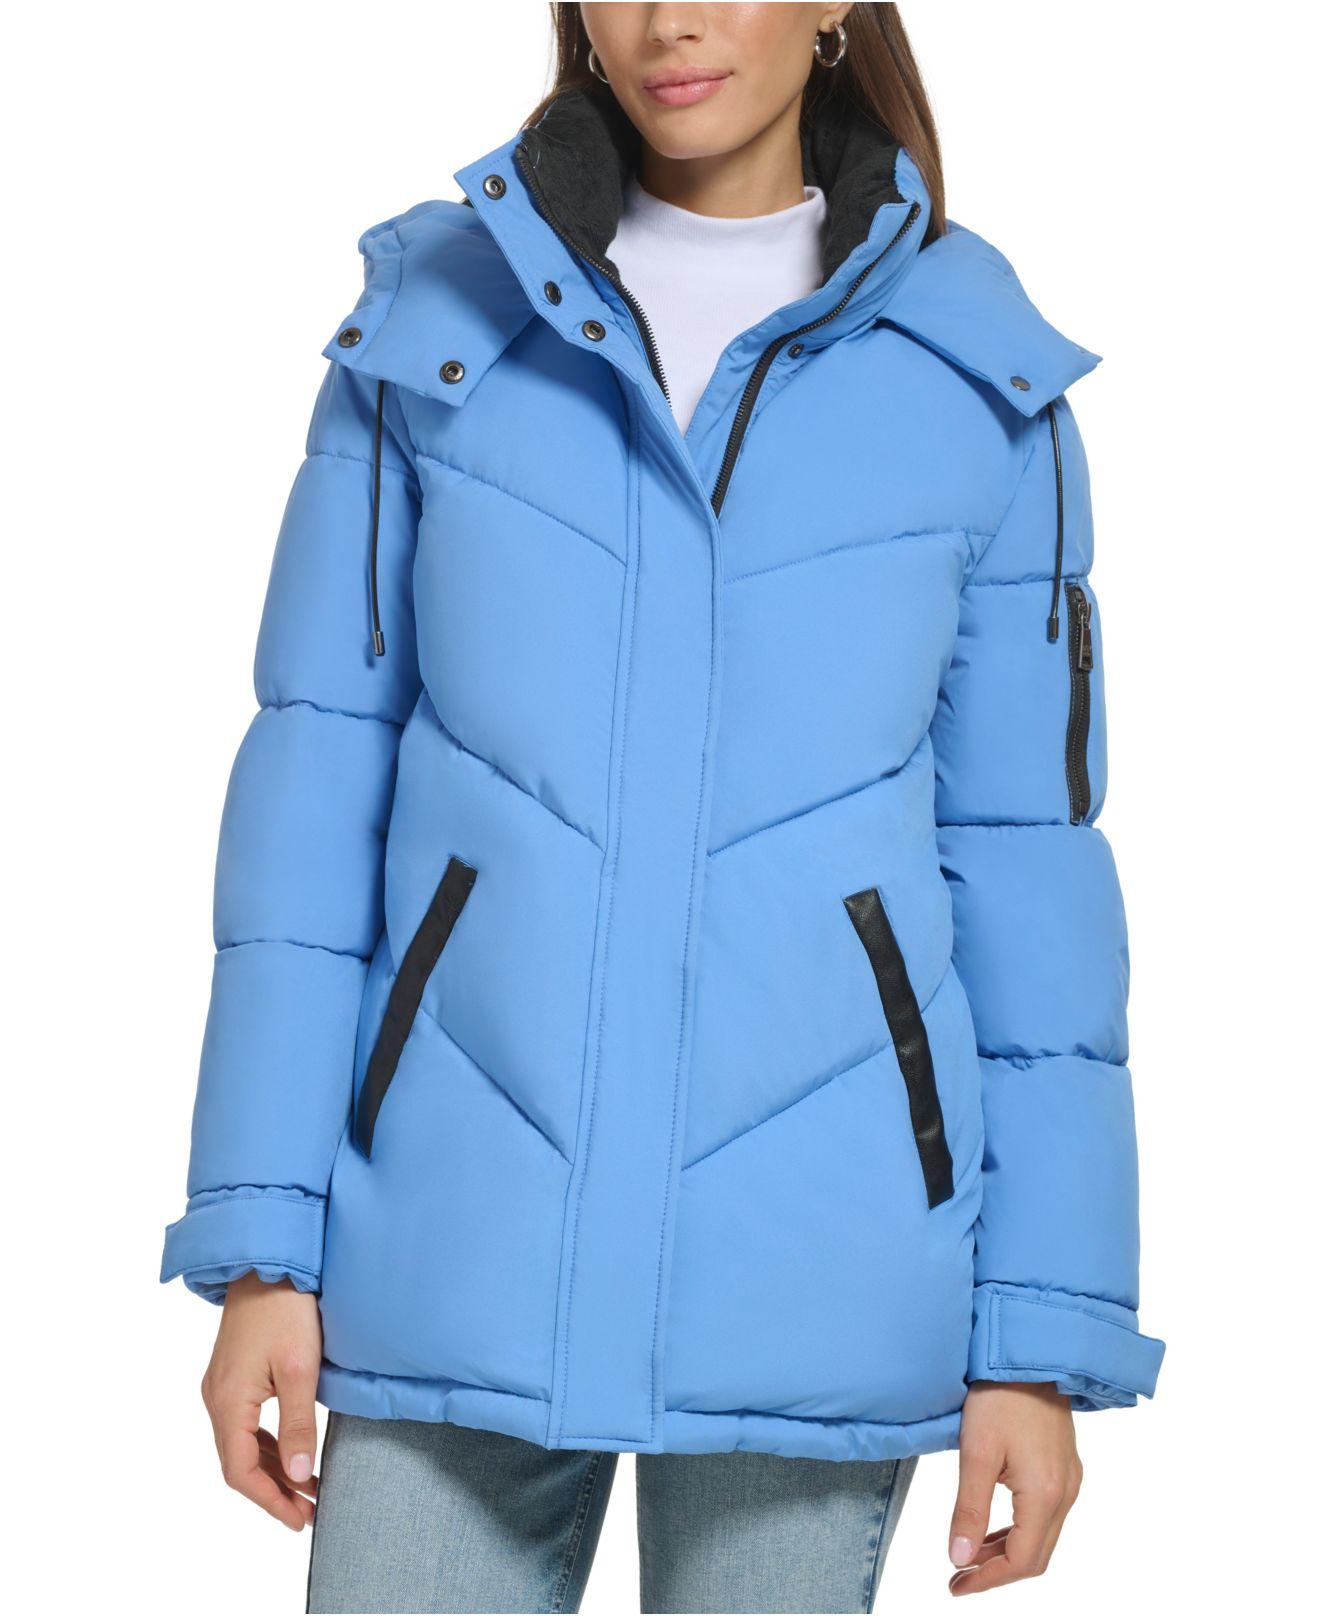 DKNY Women's Blue Long Puffer Jacket With Removeable Hood